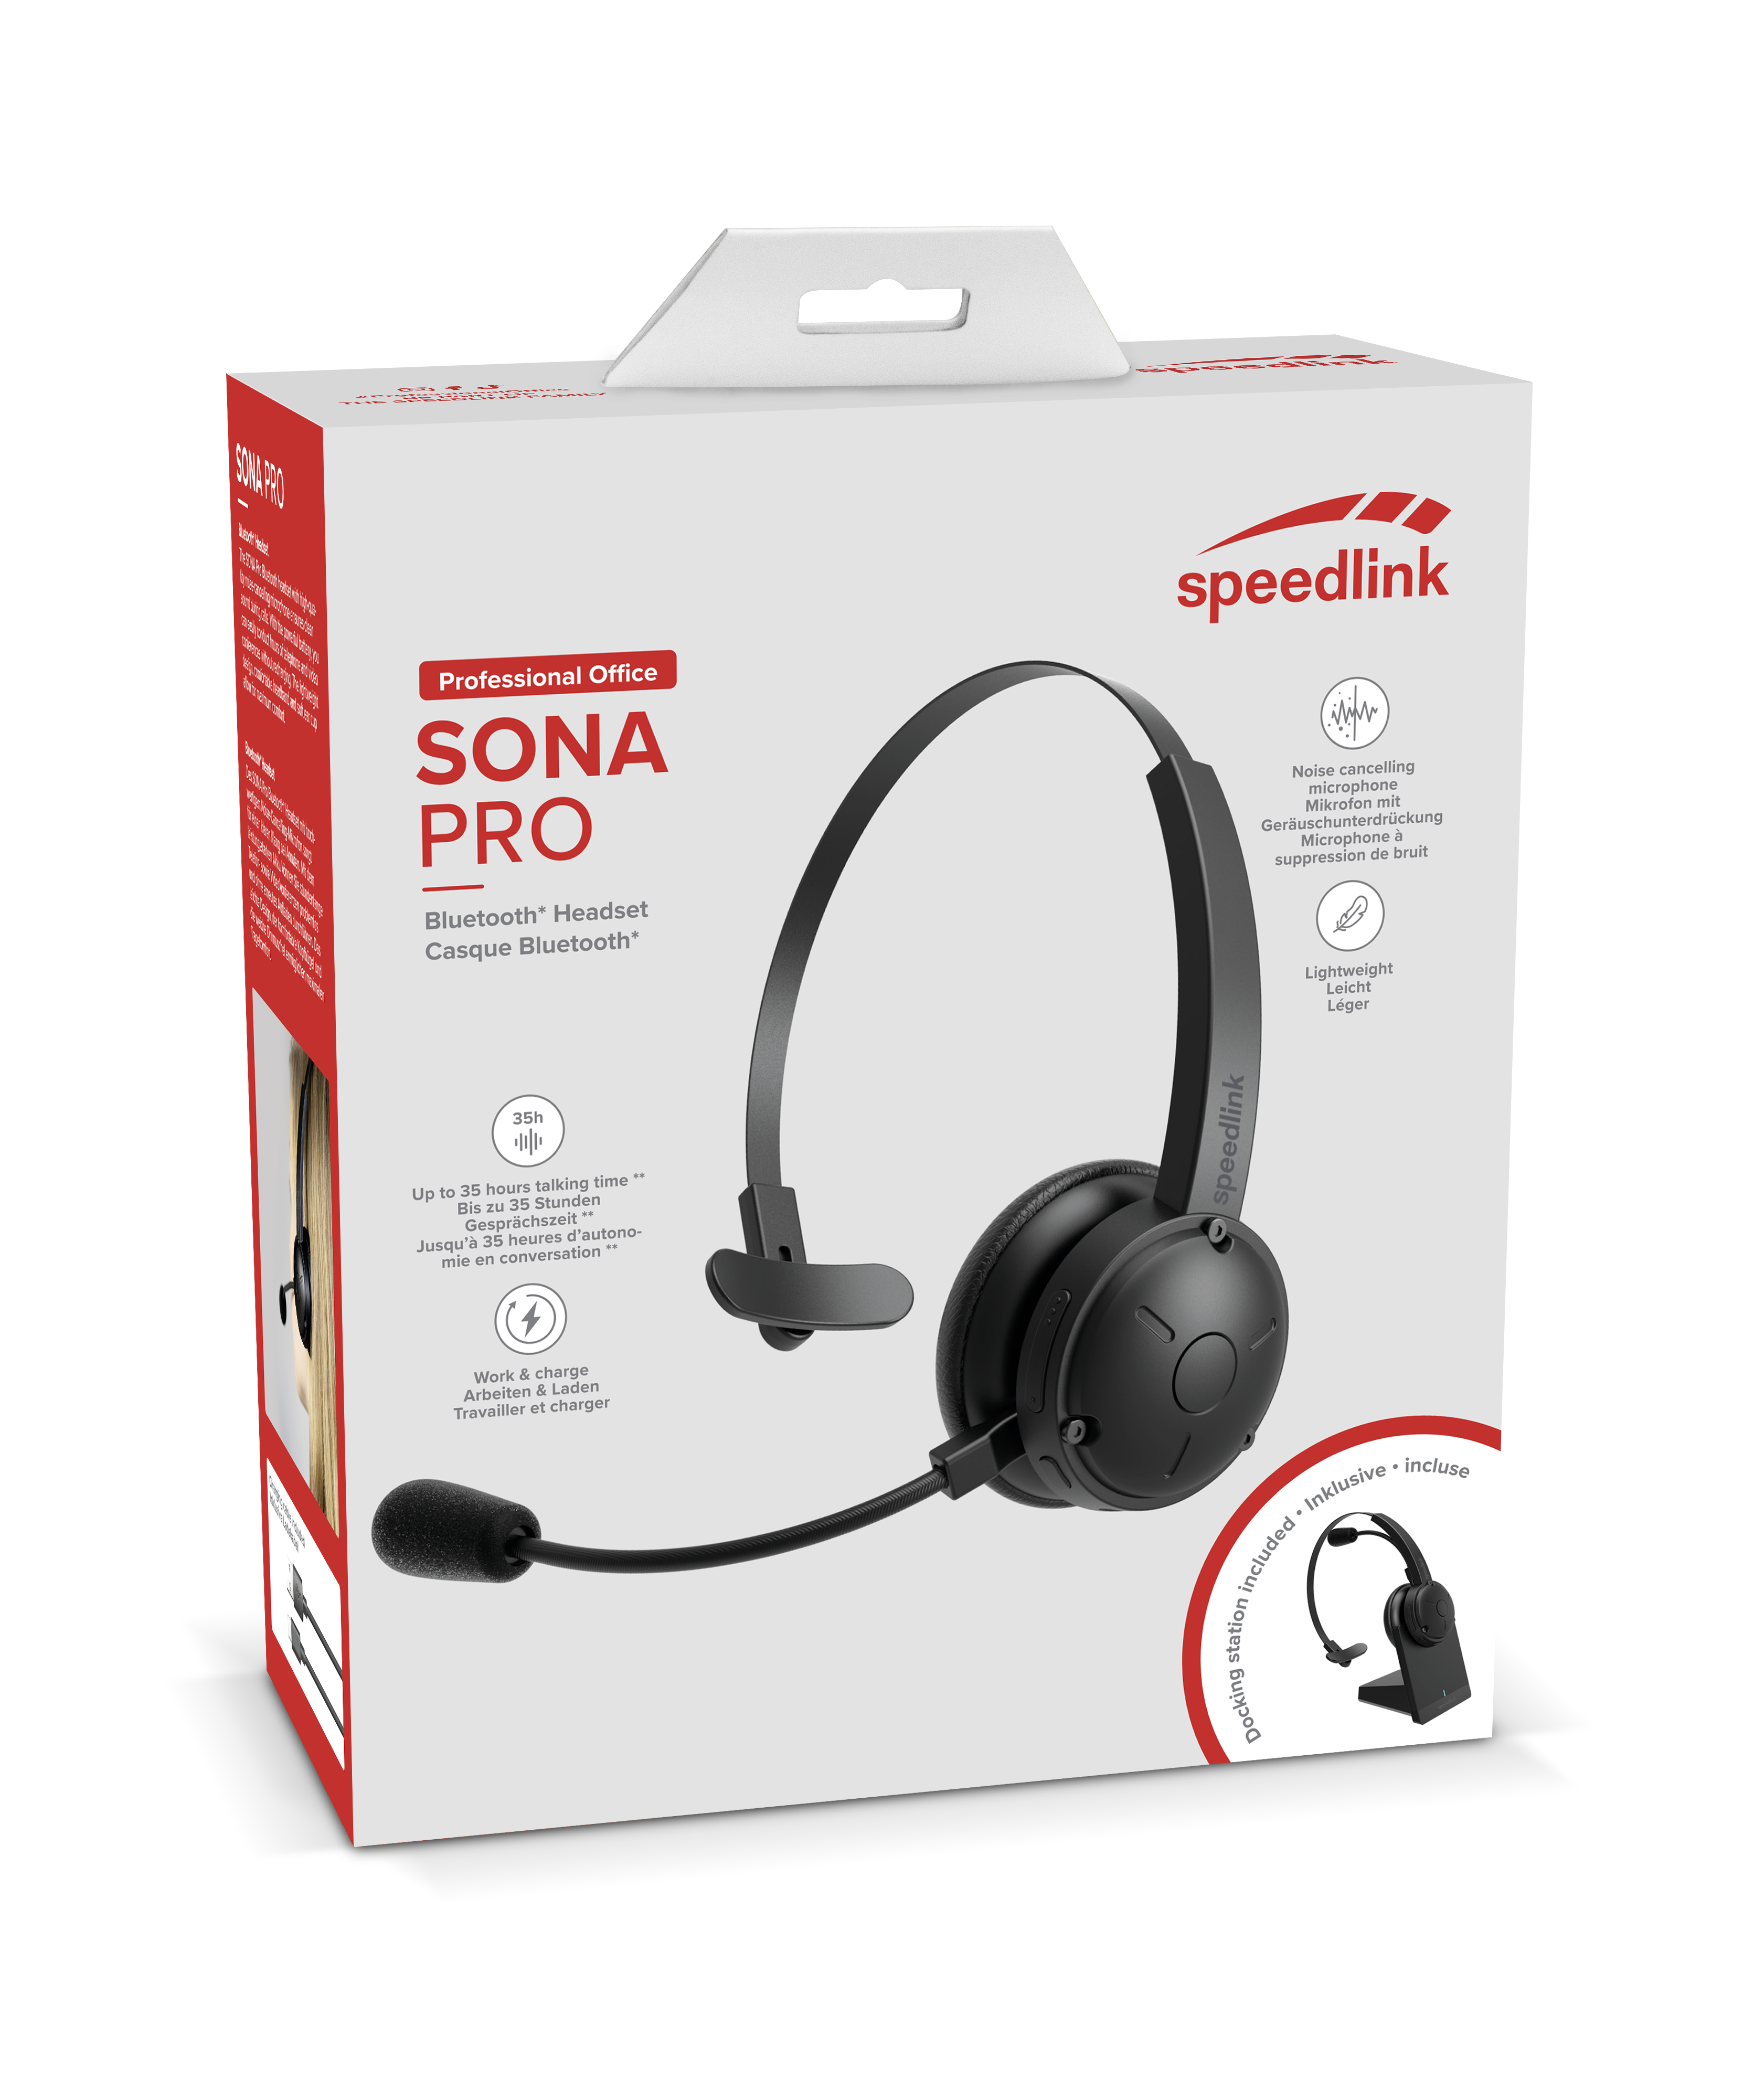 SONA PRO Bluetooth Chat Headset Microphone with Canceling Noise SL-870301-BK 